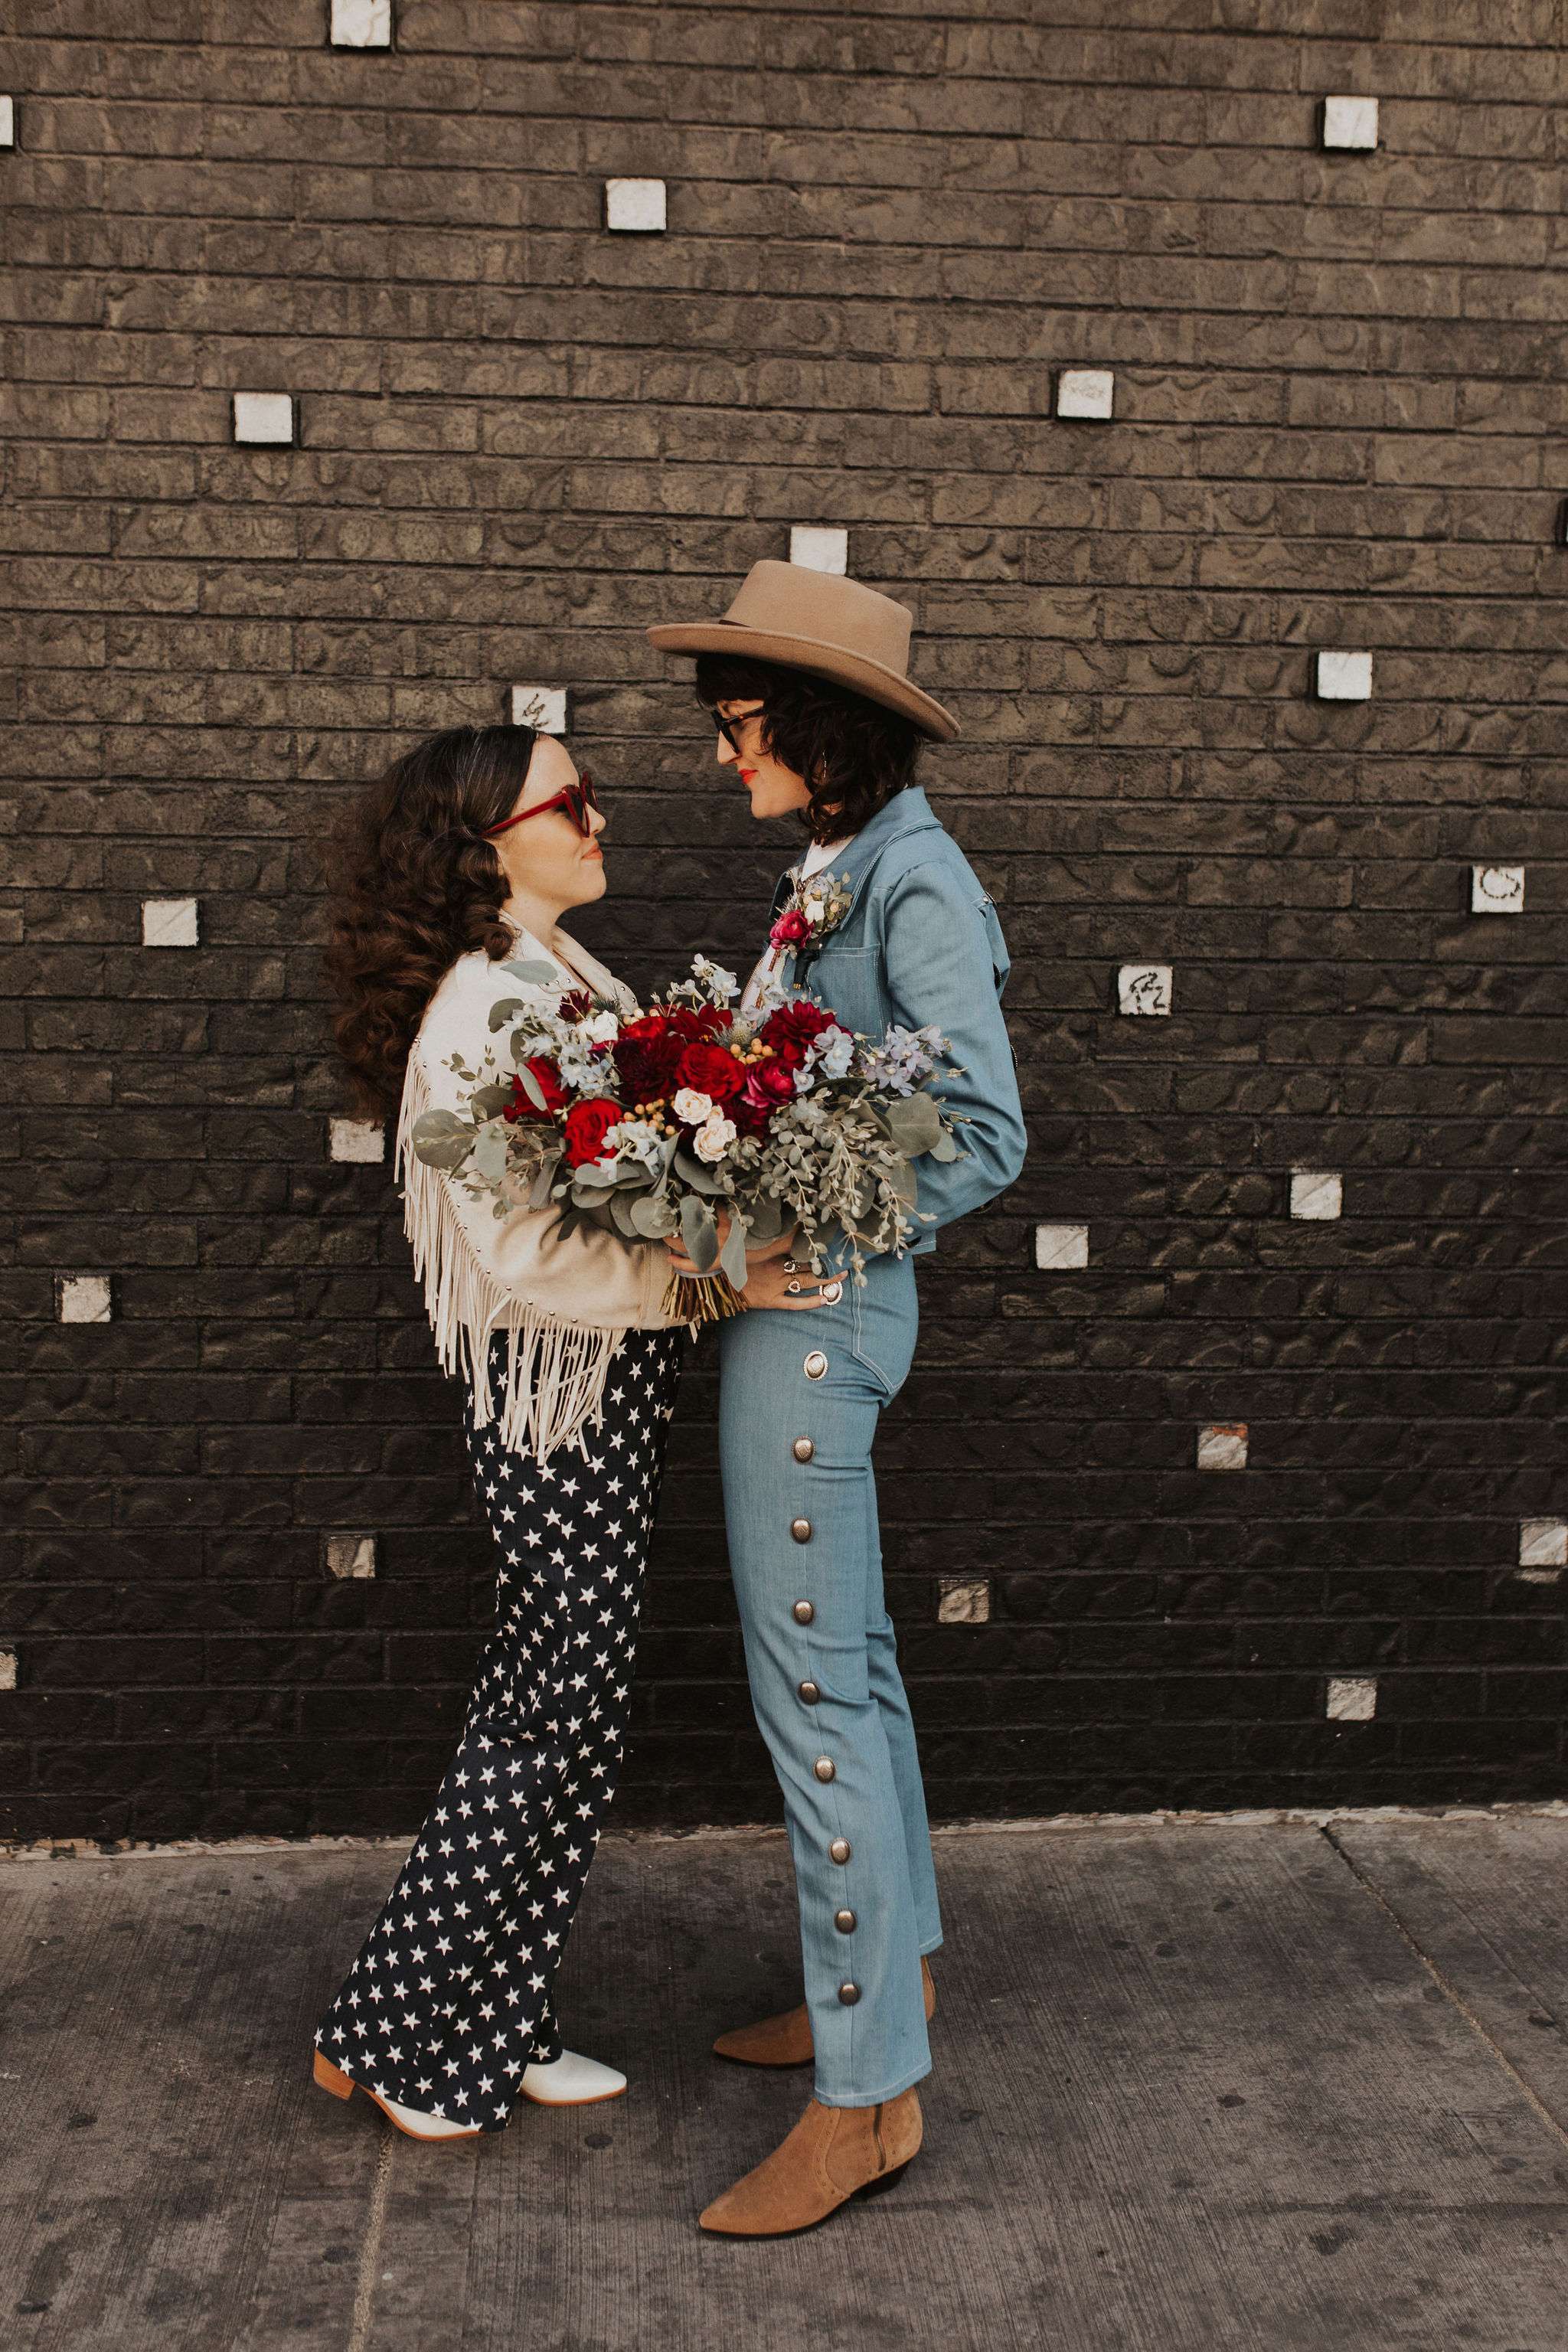 Seventies Western Elopement On The Outskirts Of Las Vegas